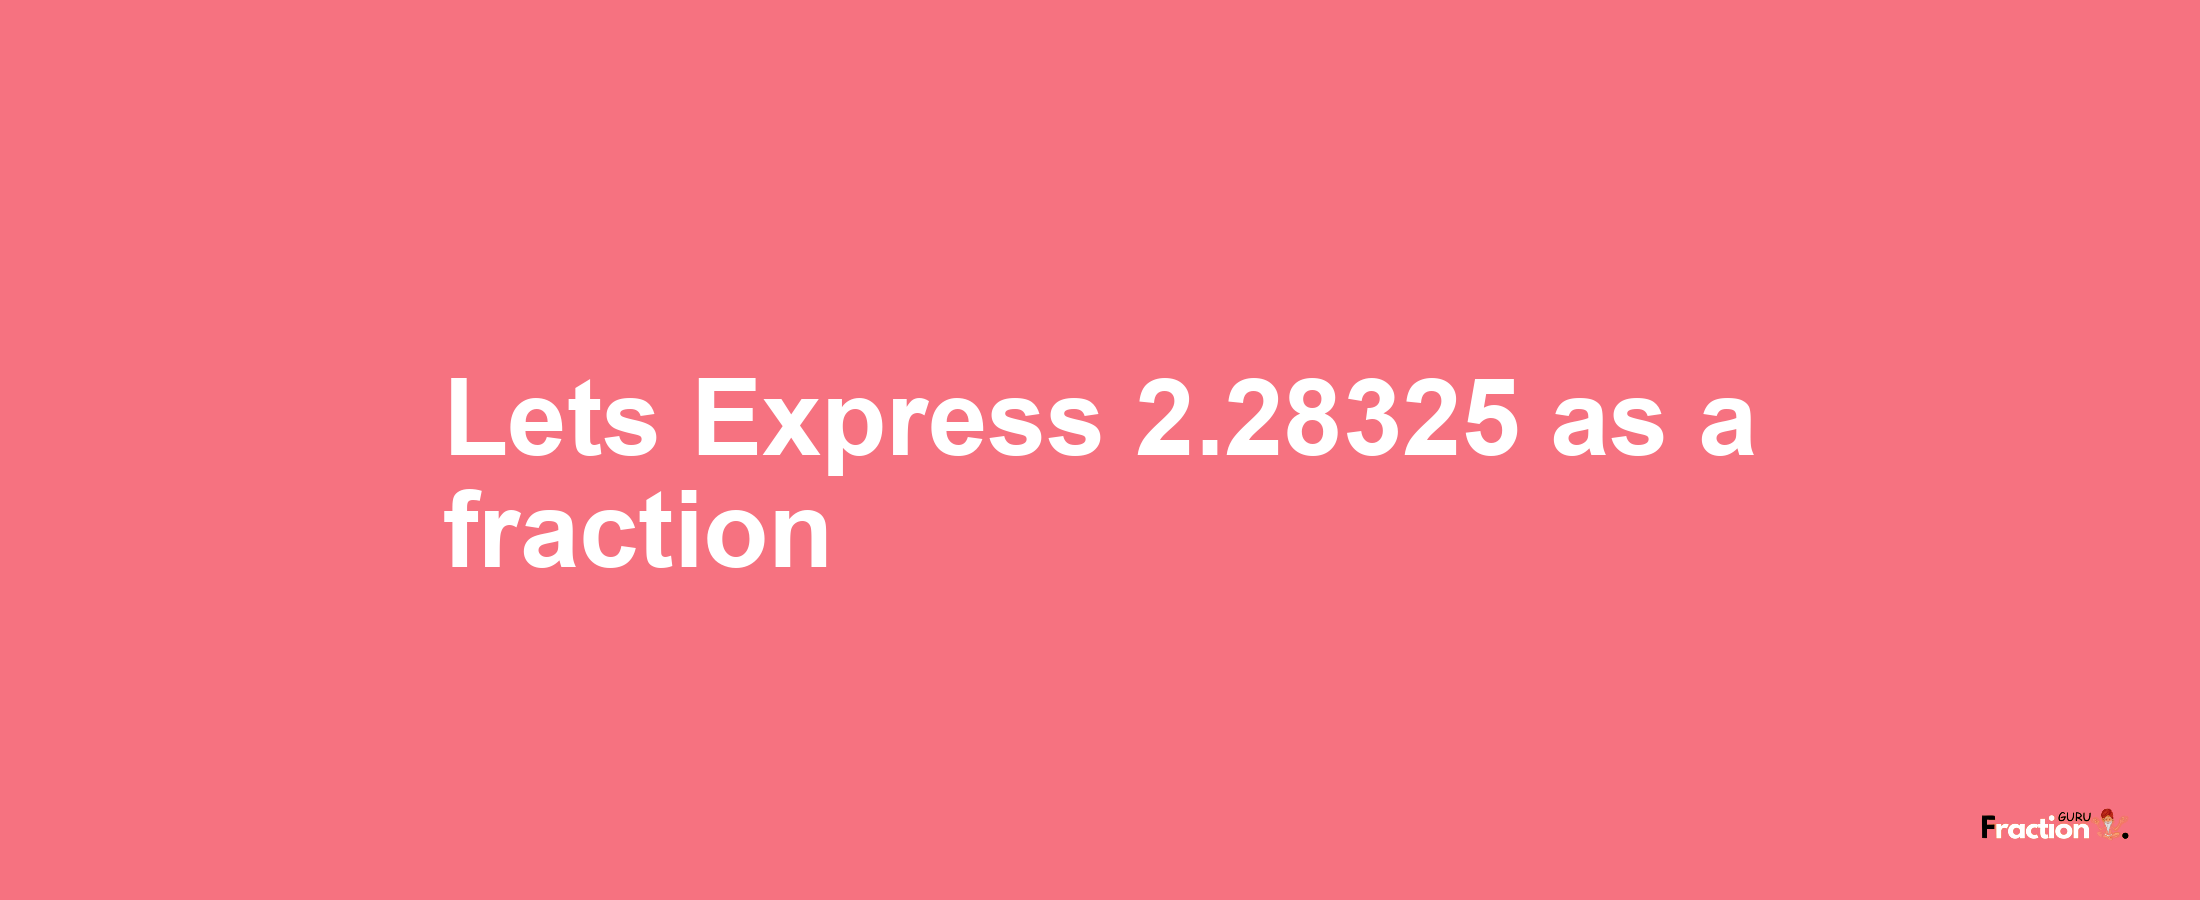 Lets Express 2.28325 as afraction